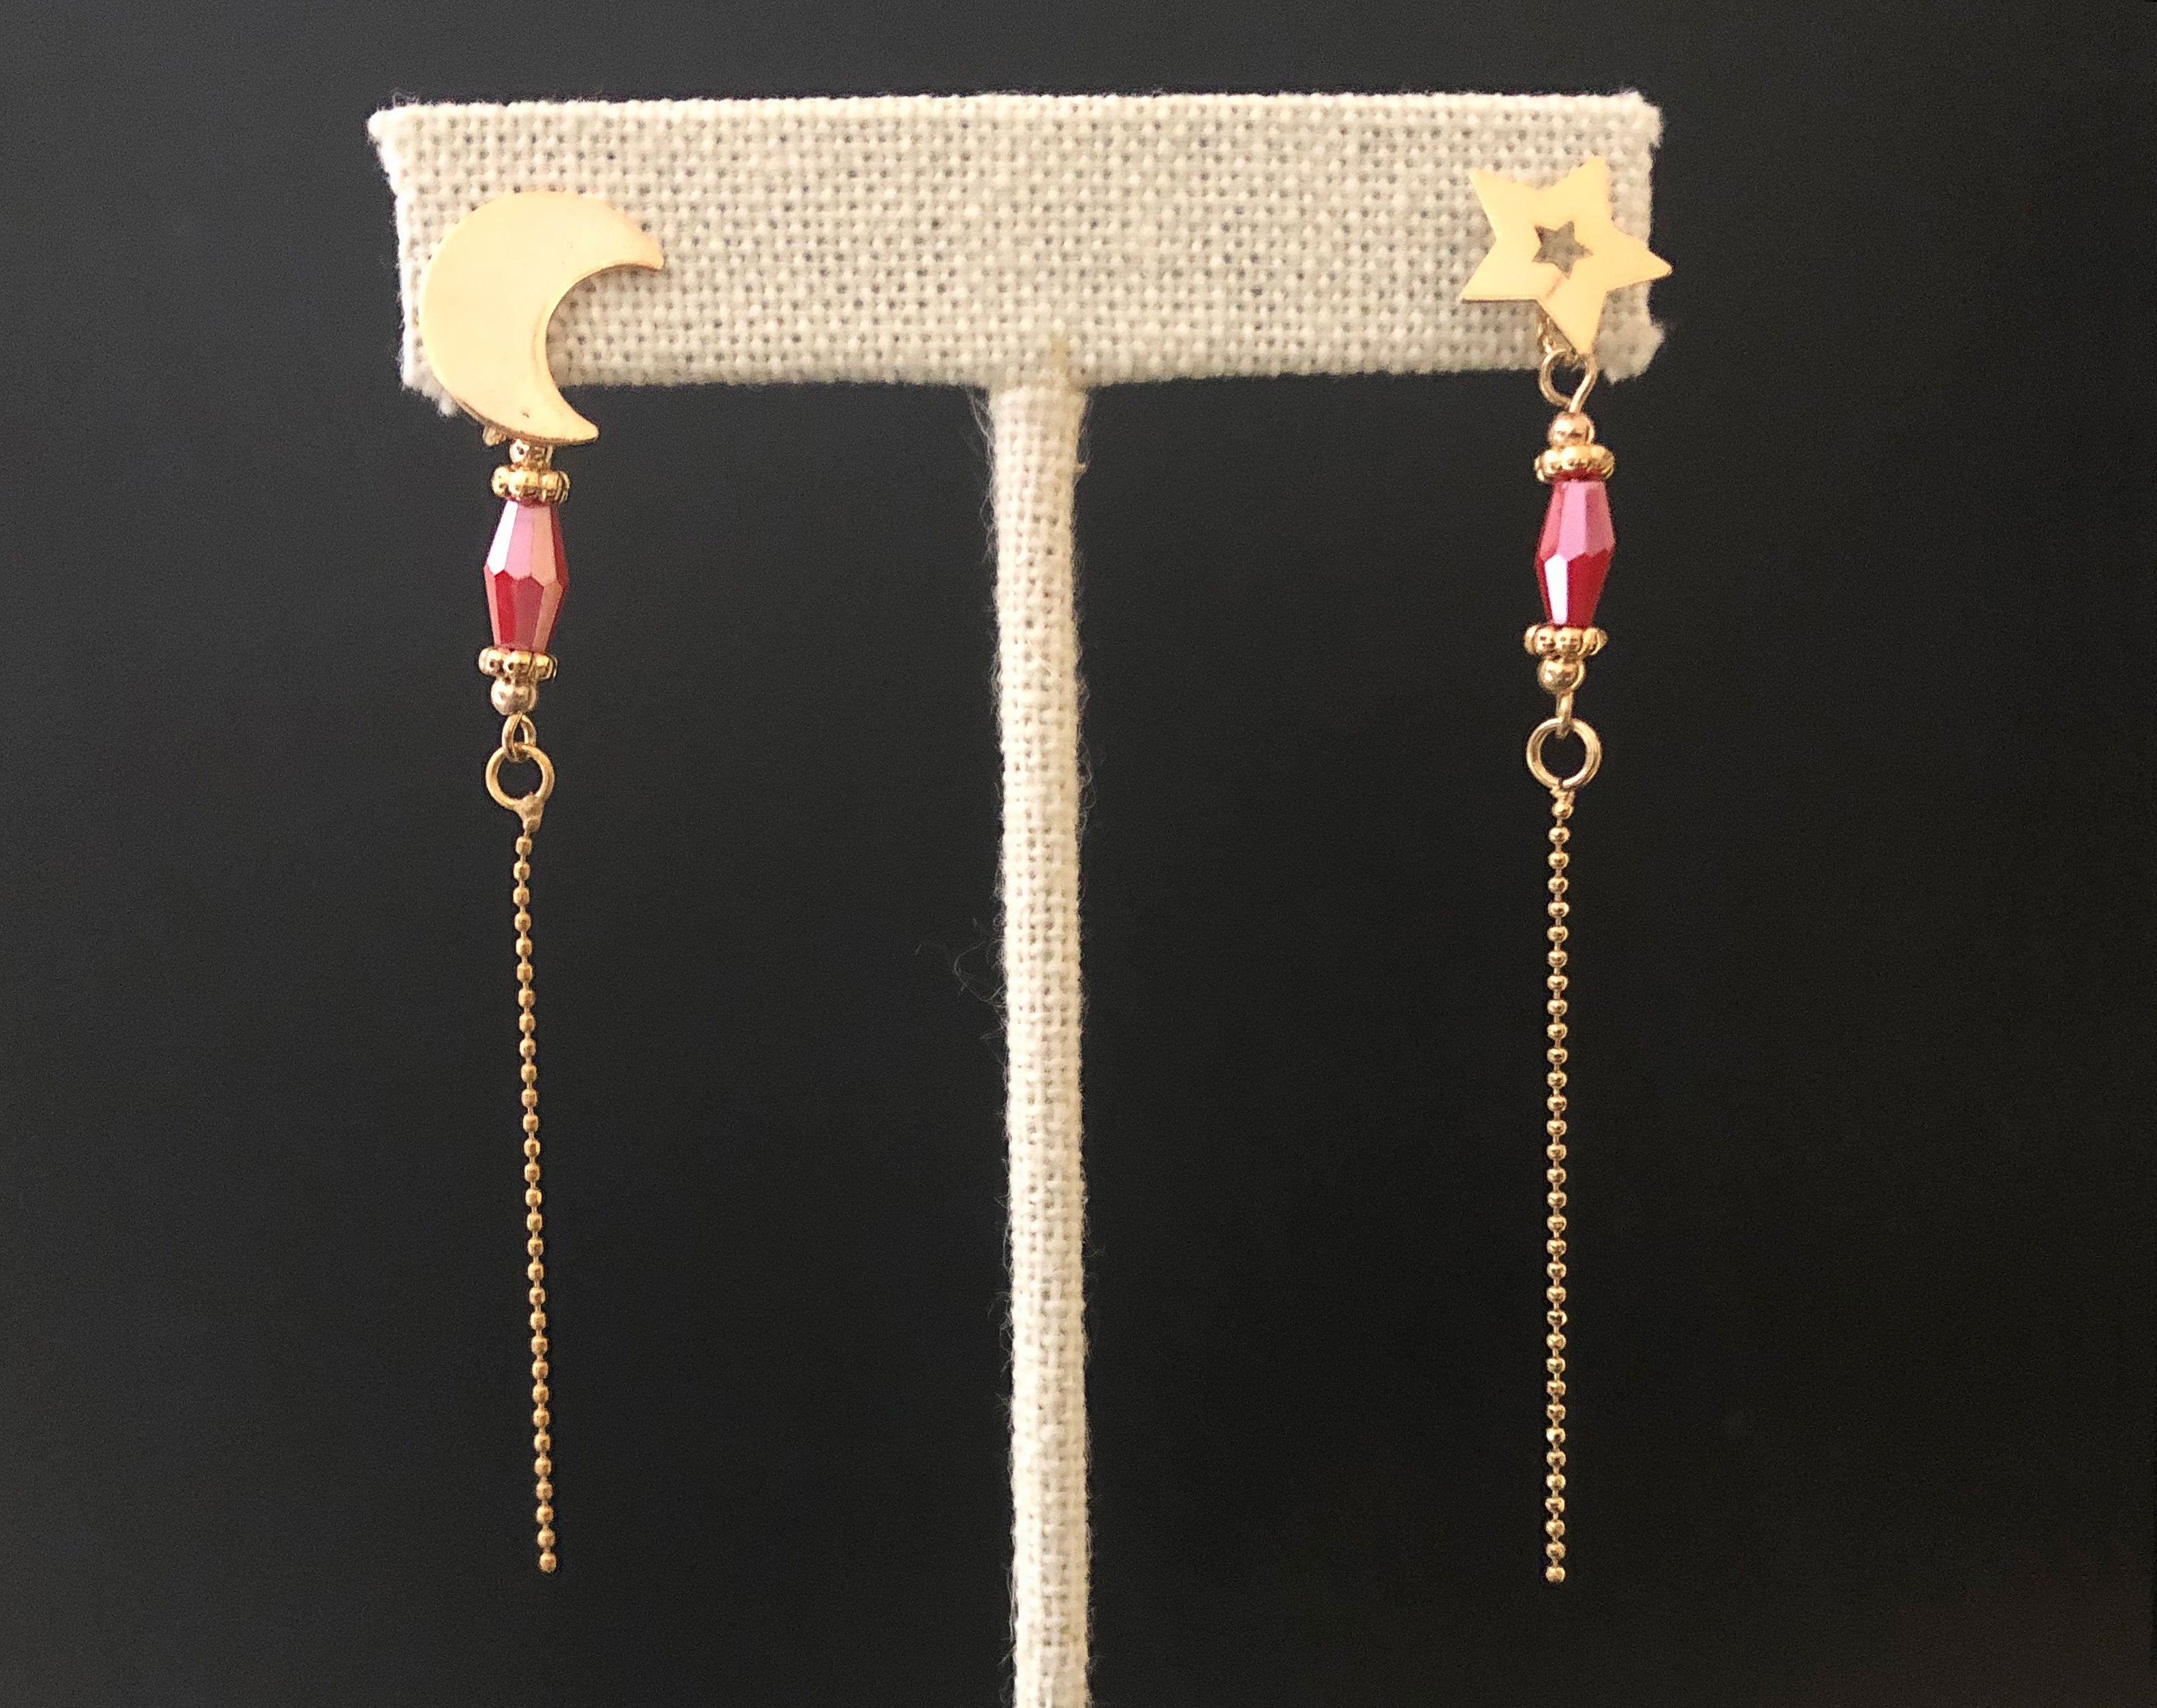 Gold filled earring with moon, star, and pendant string chain